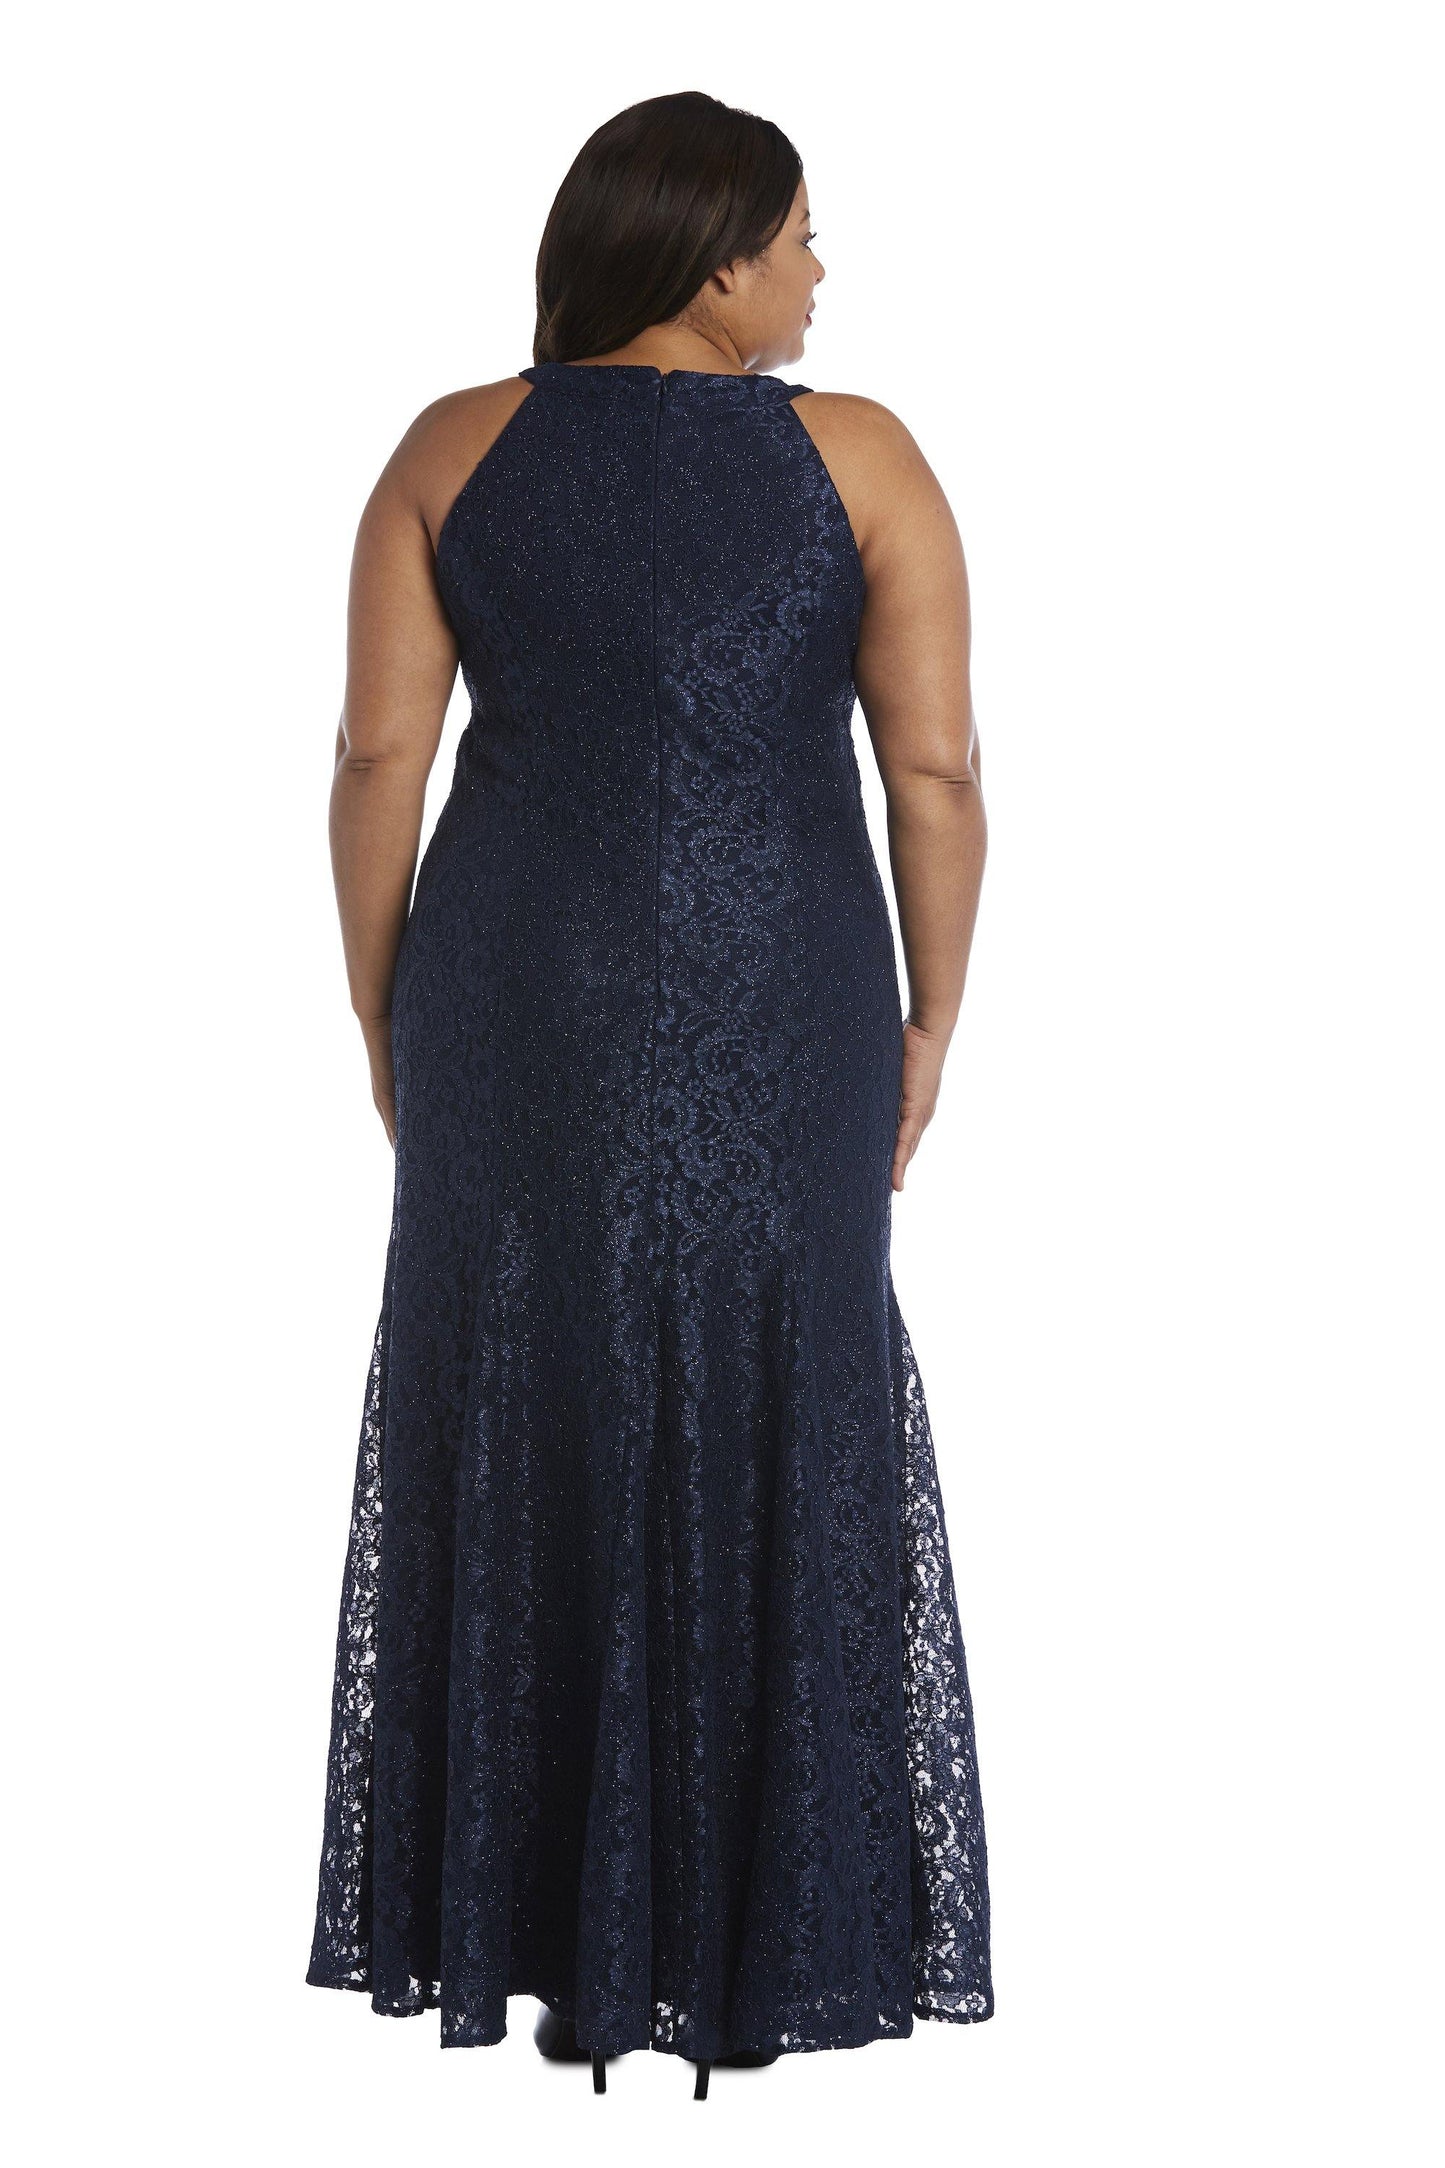 Nightway Long Plus Size Lace Formal Dress 21713W - The Dress Outlet